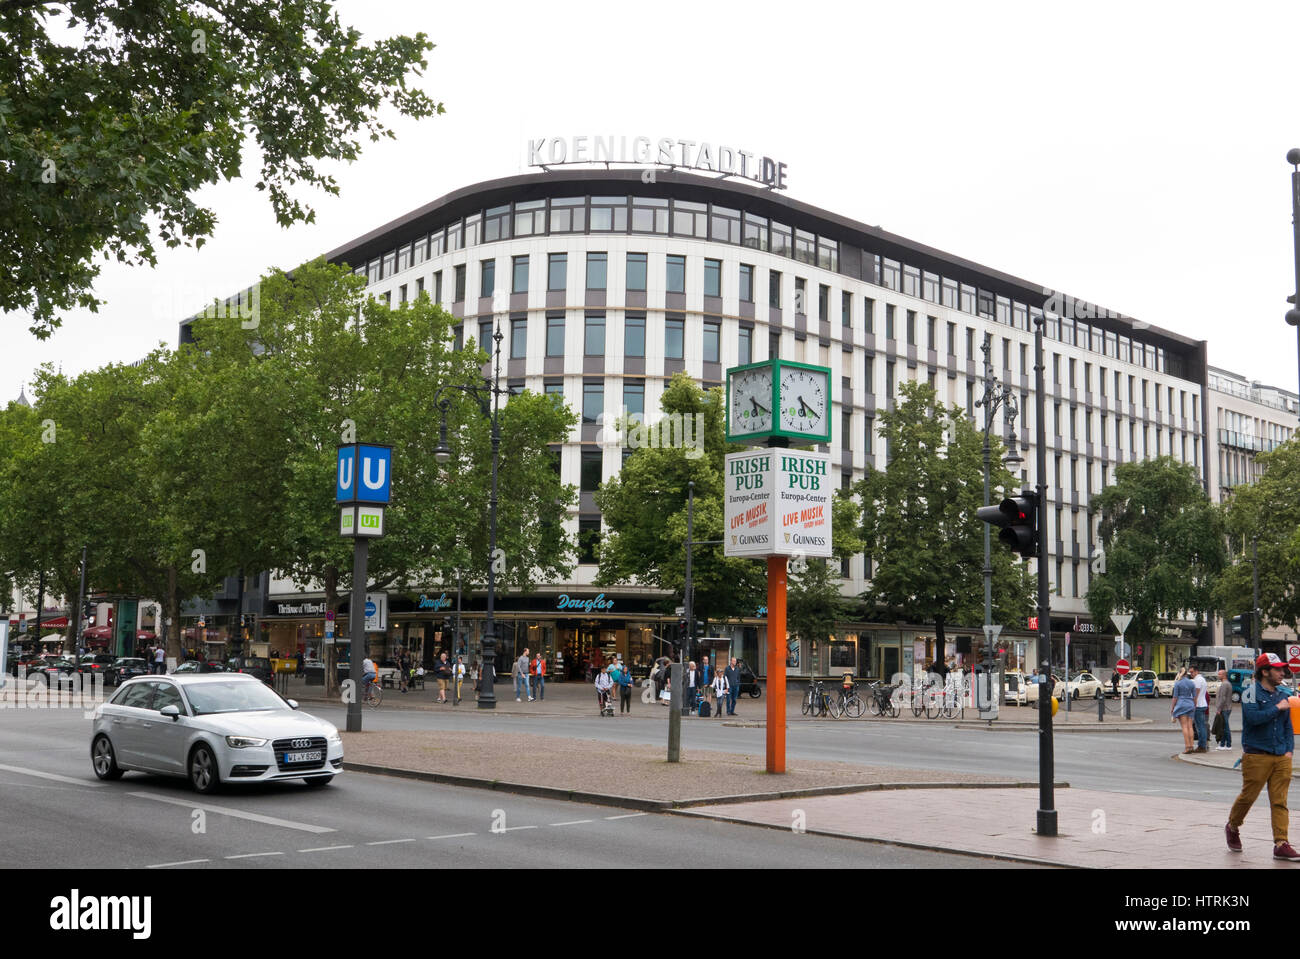 A famous shopping complex in the centre of Berlin, Germany Stock Photo